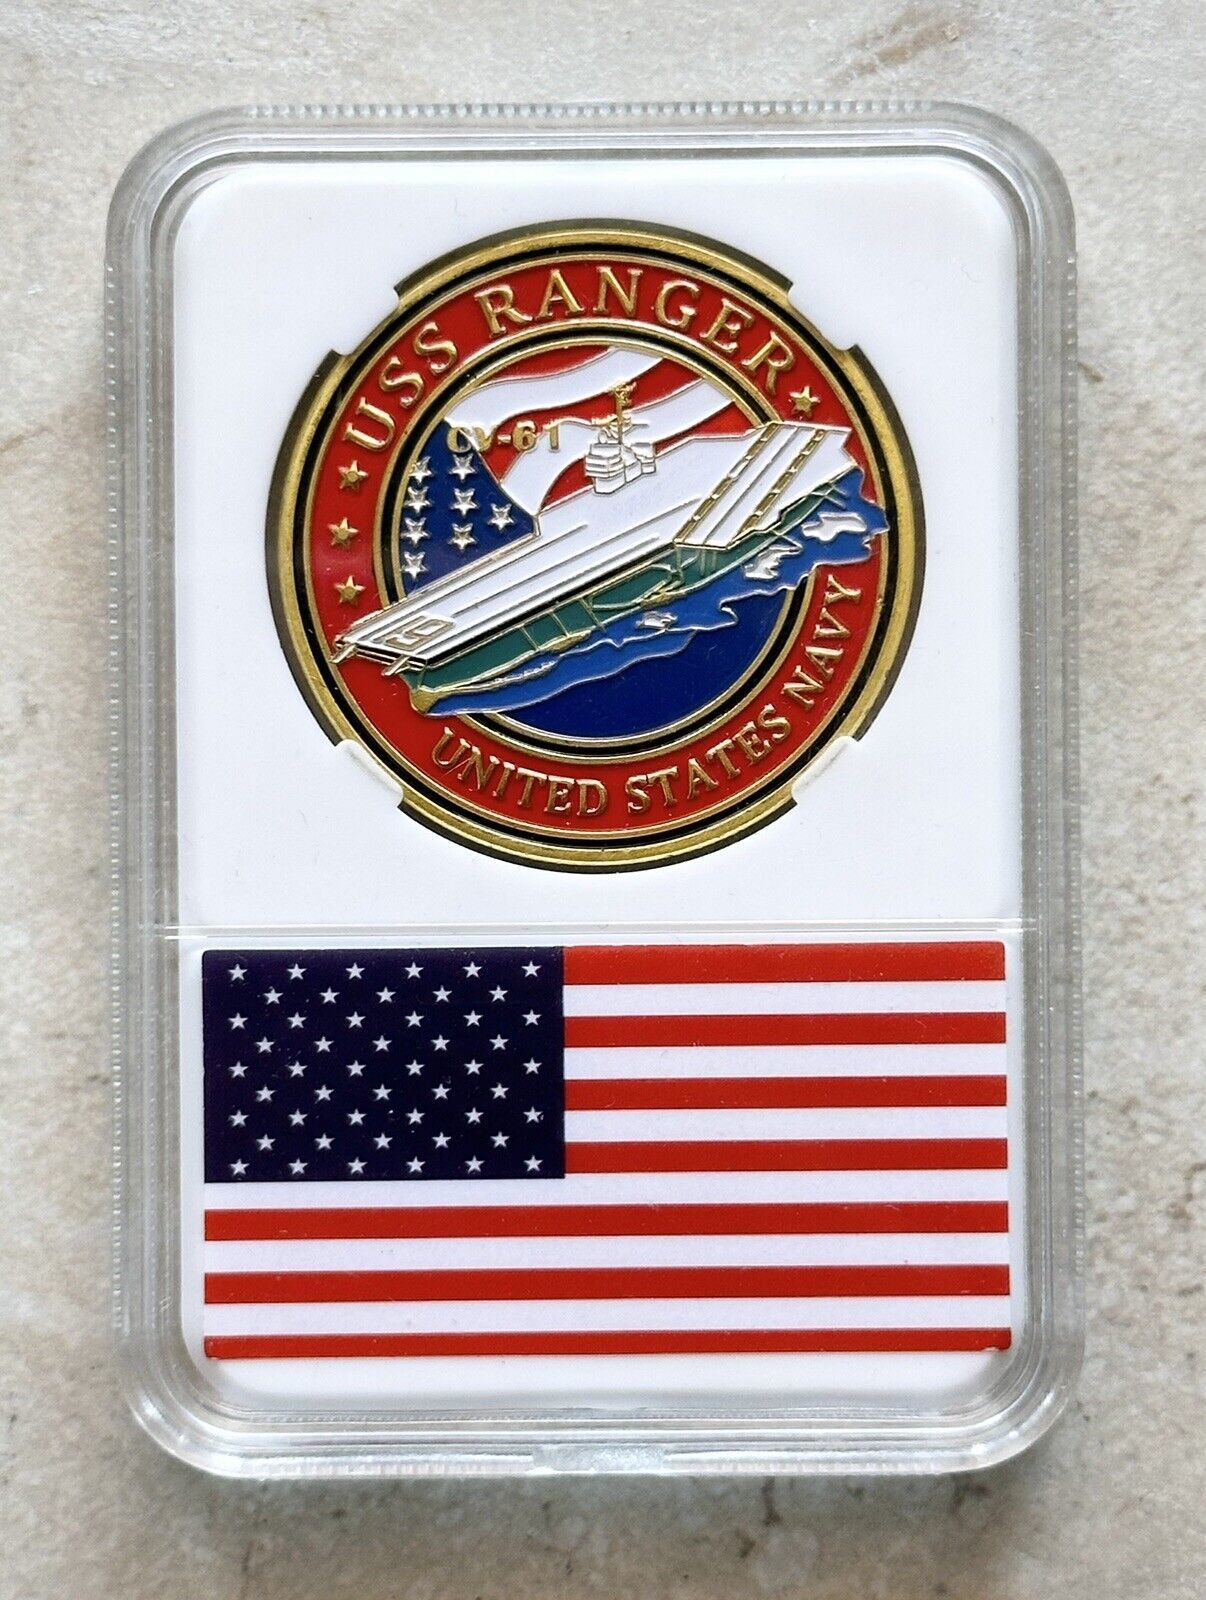 Primary image for US NAVY - USS RANGER CV-61 Challenge Coin With American Flag Case